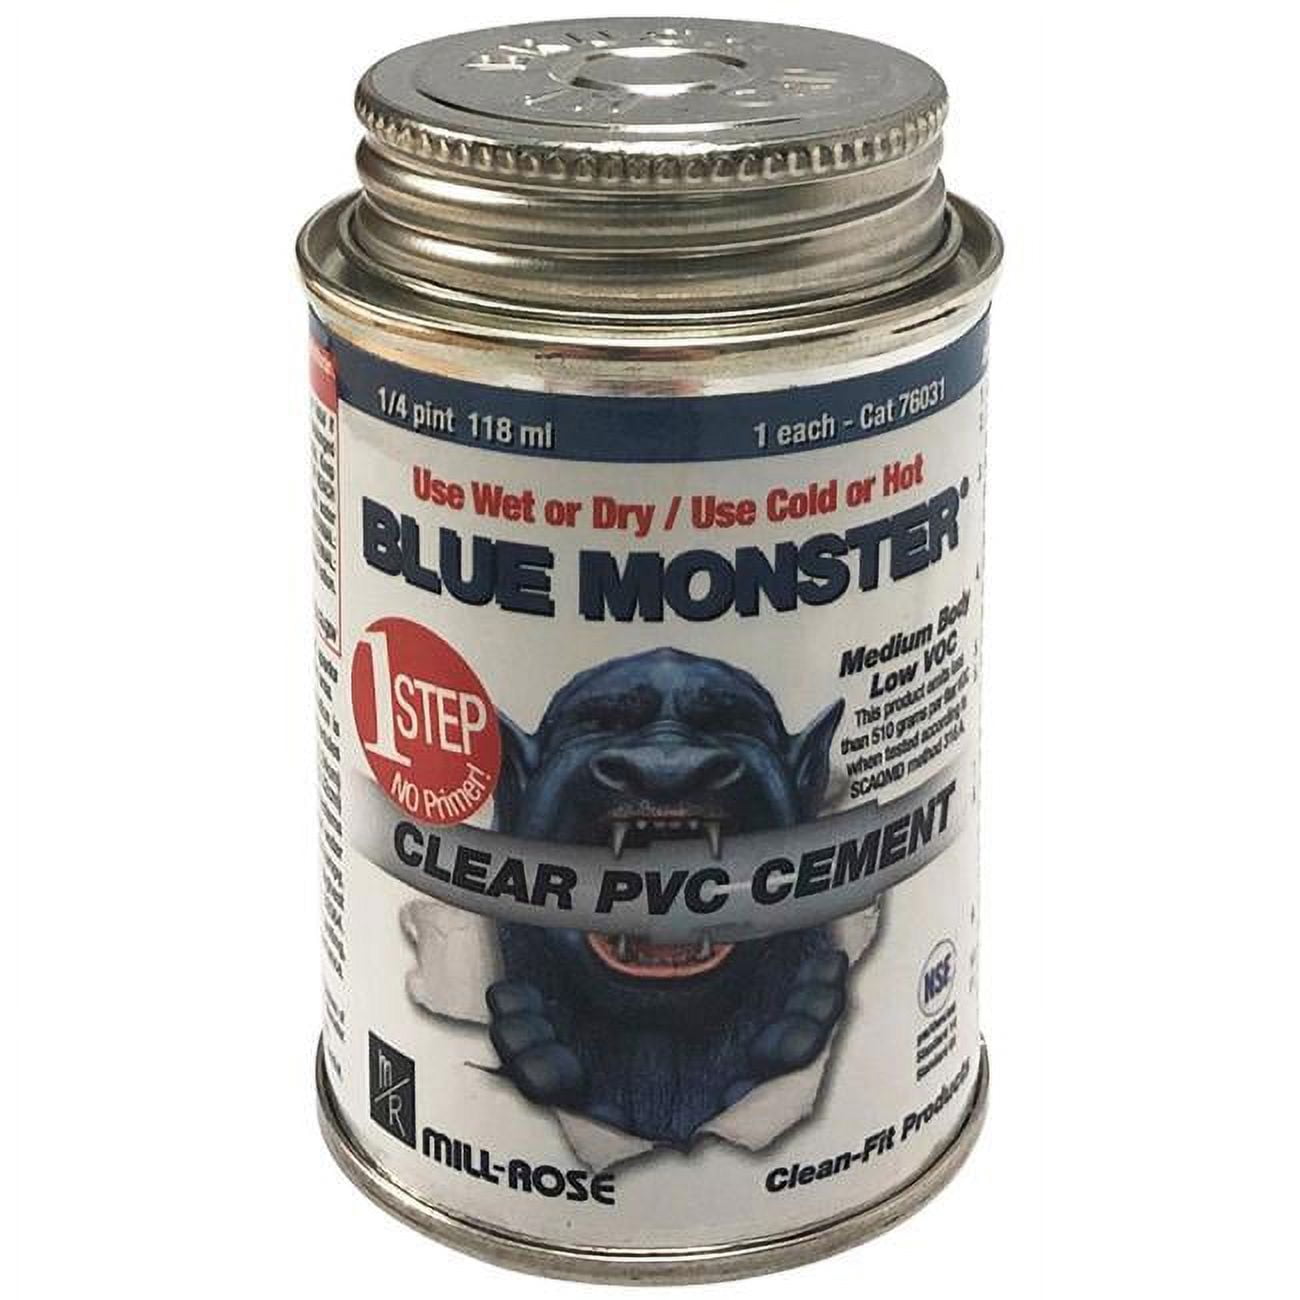 Picture of Blue Monster 4000148 4 oz All Weather Cement for PVC - Clear